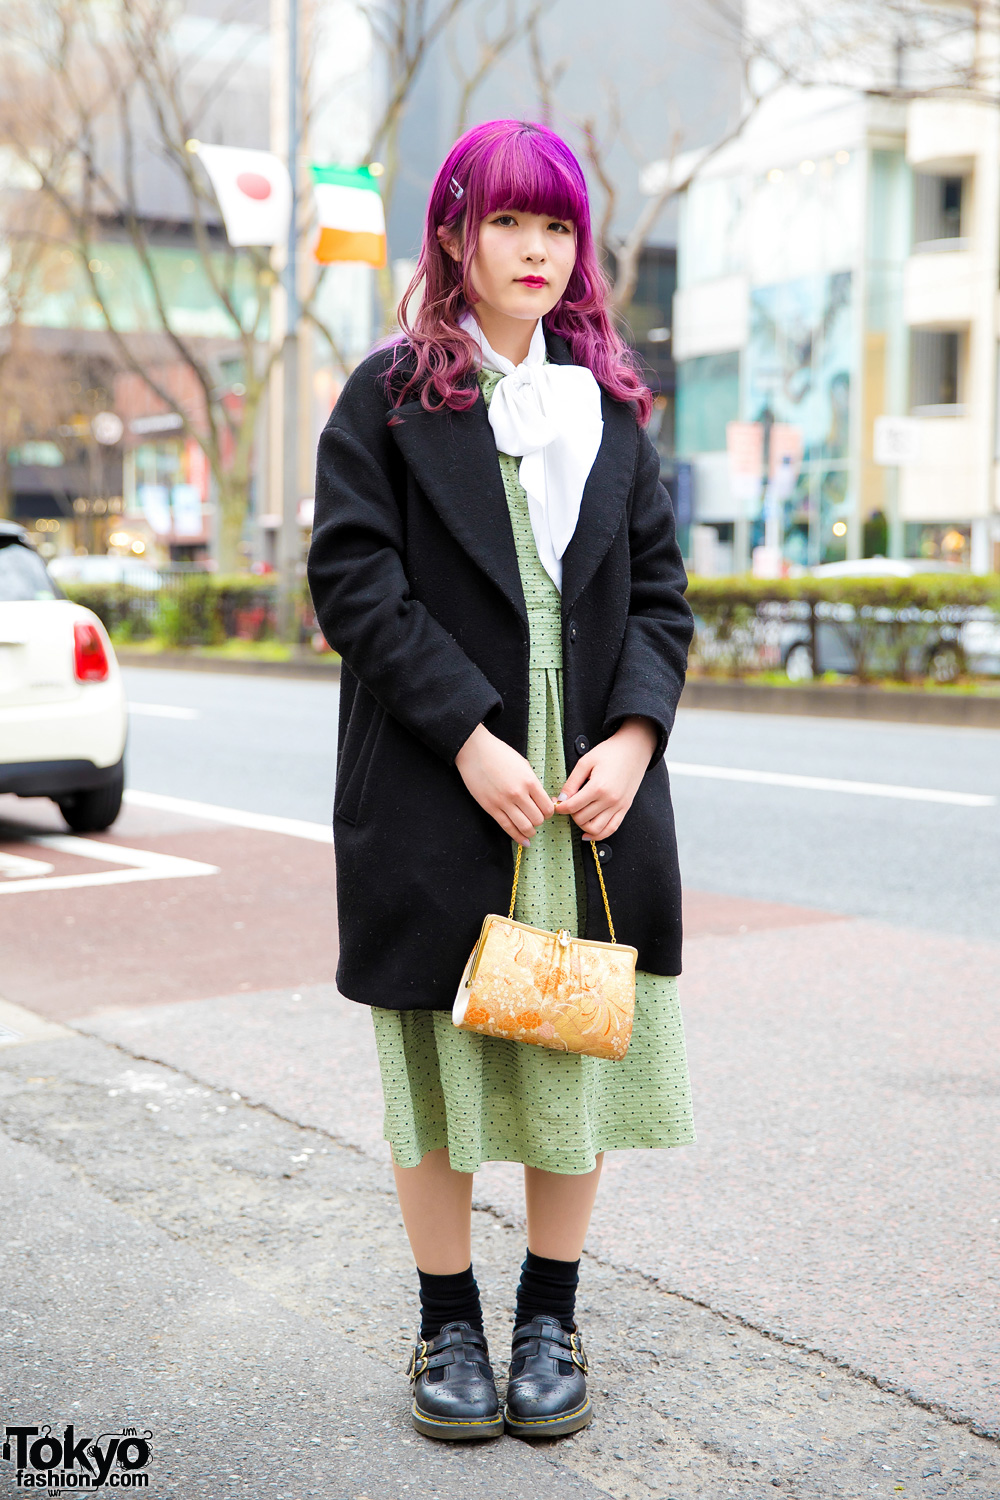 Purple-Haired Harajuku Girl in Chic Retro Vintage Style w/ Dr. Martens ...